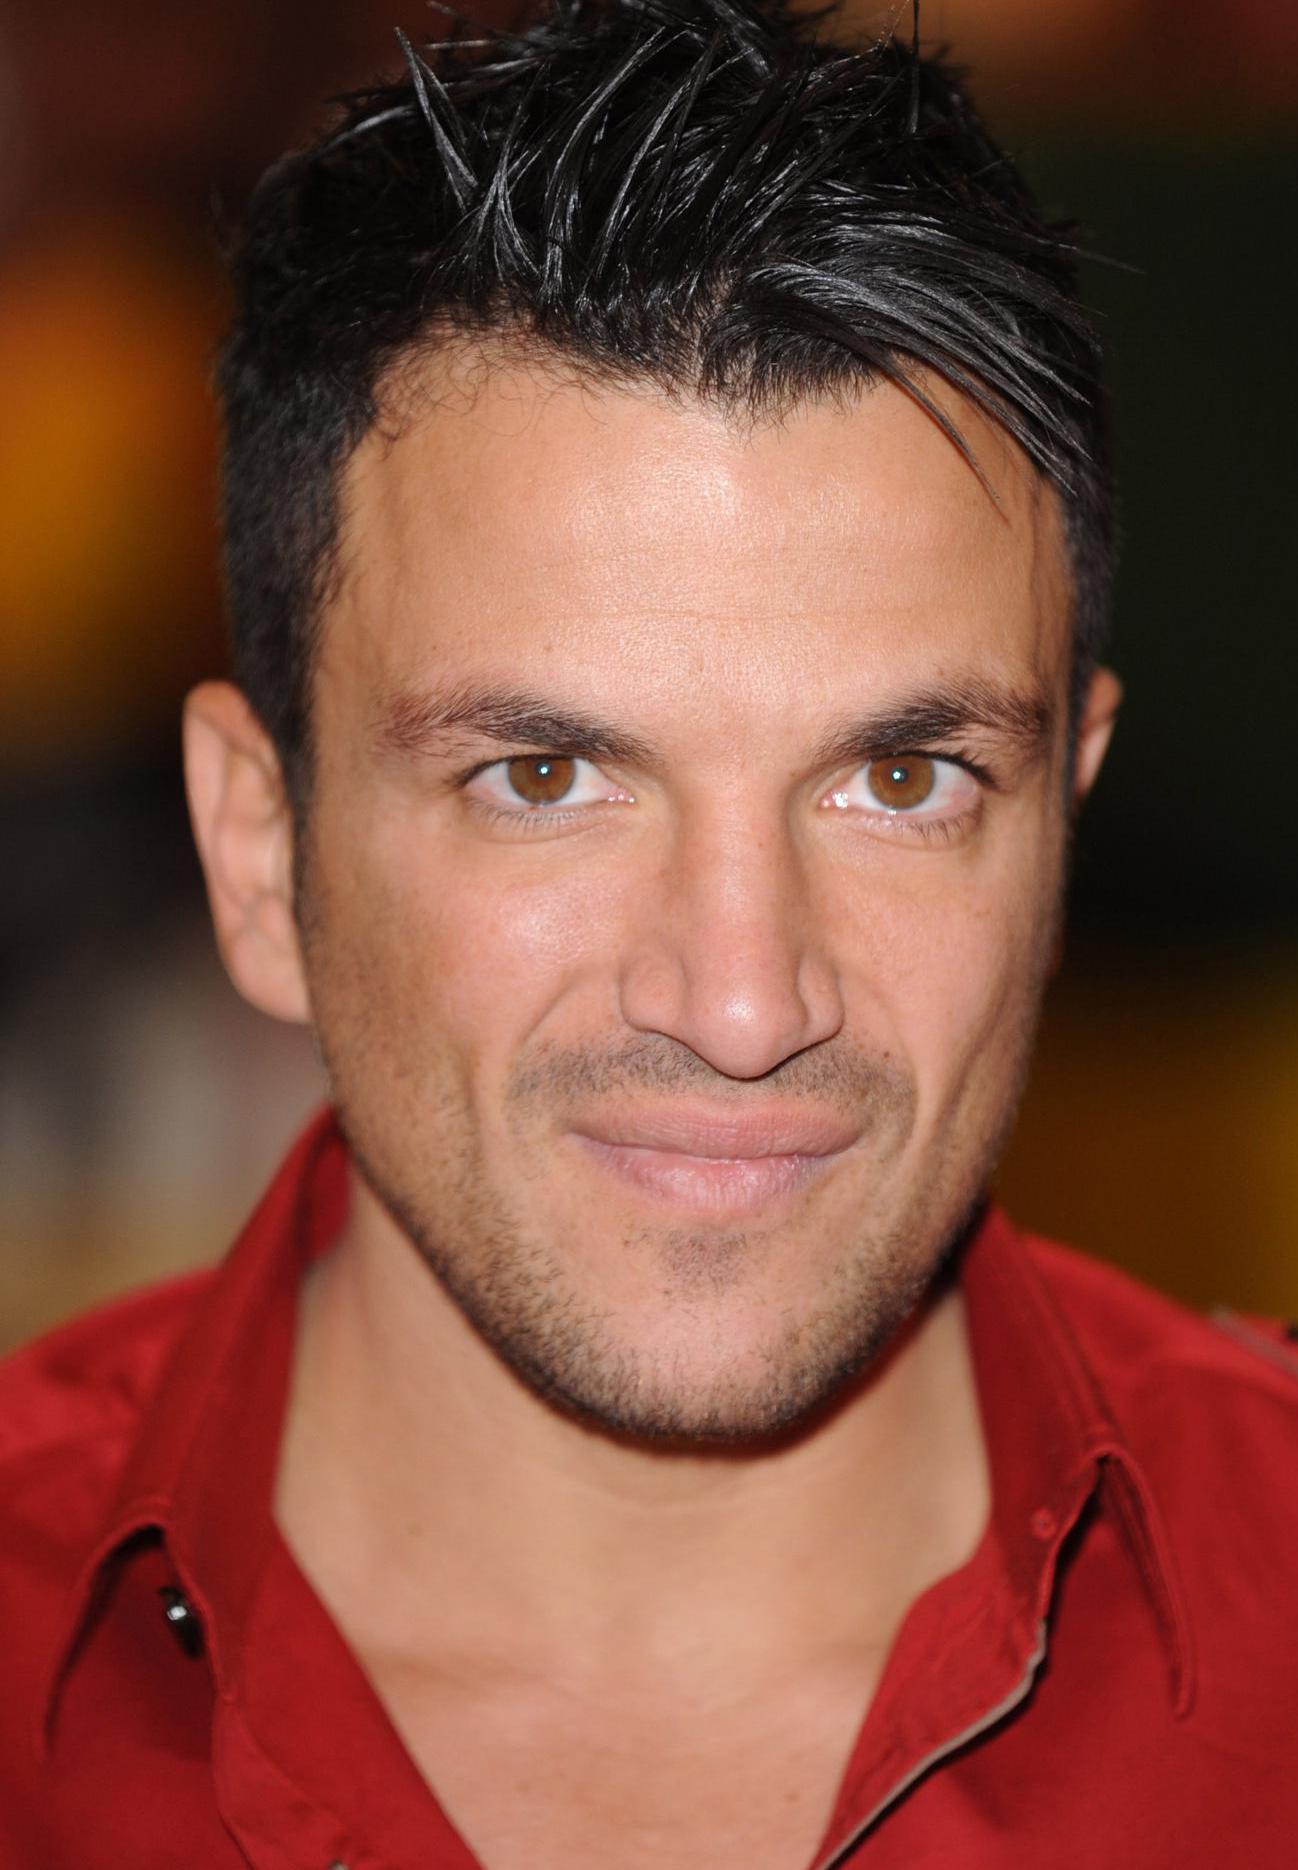 Peter Andre 